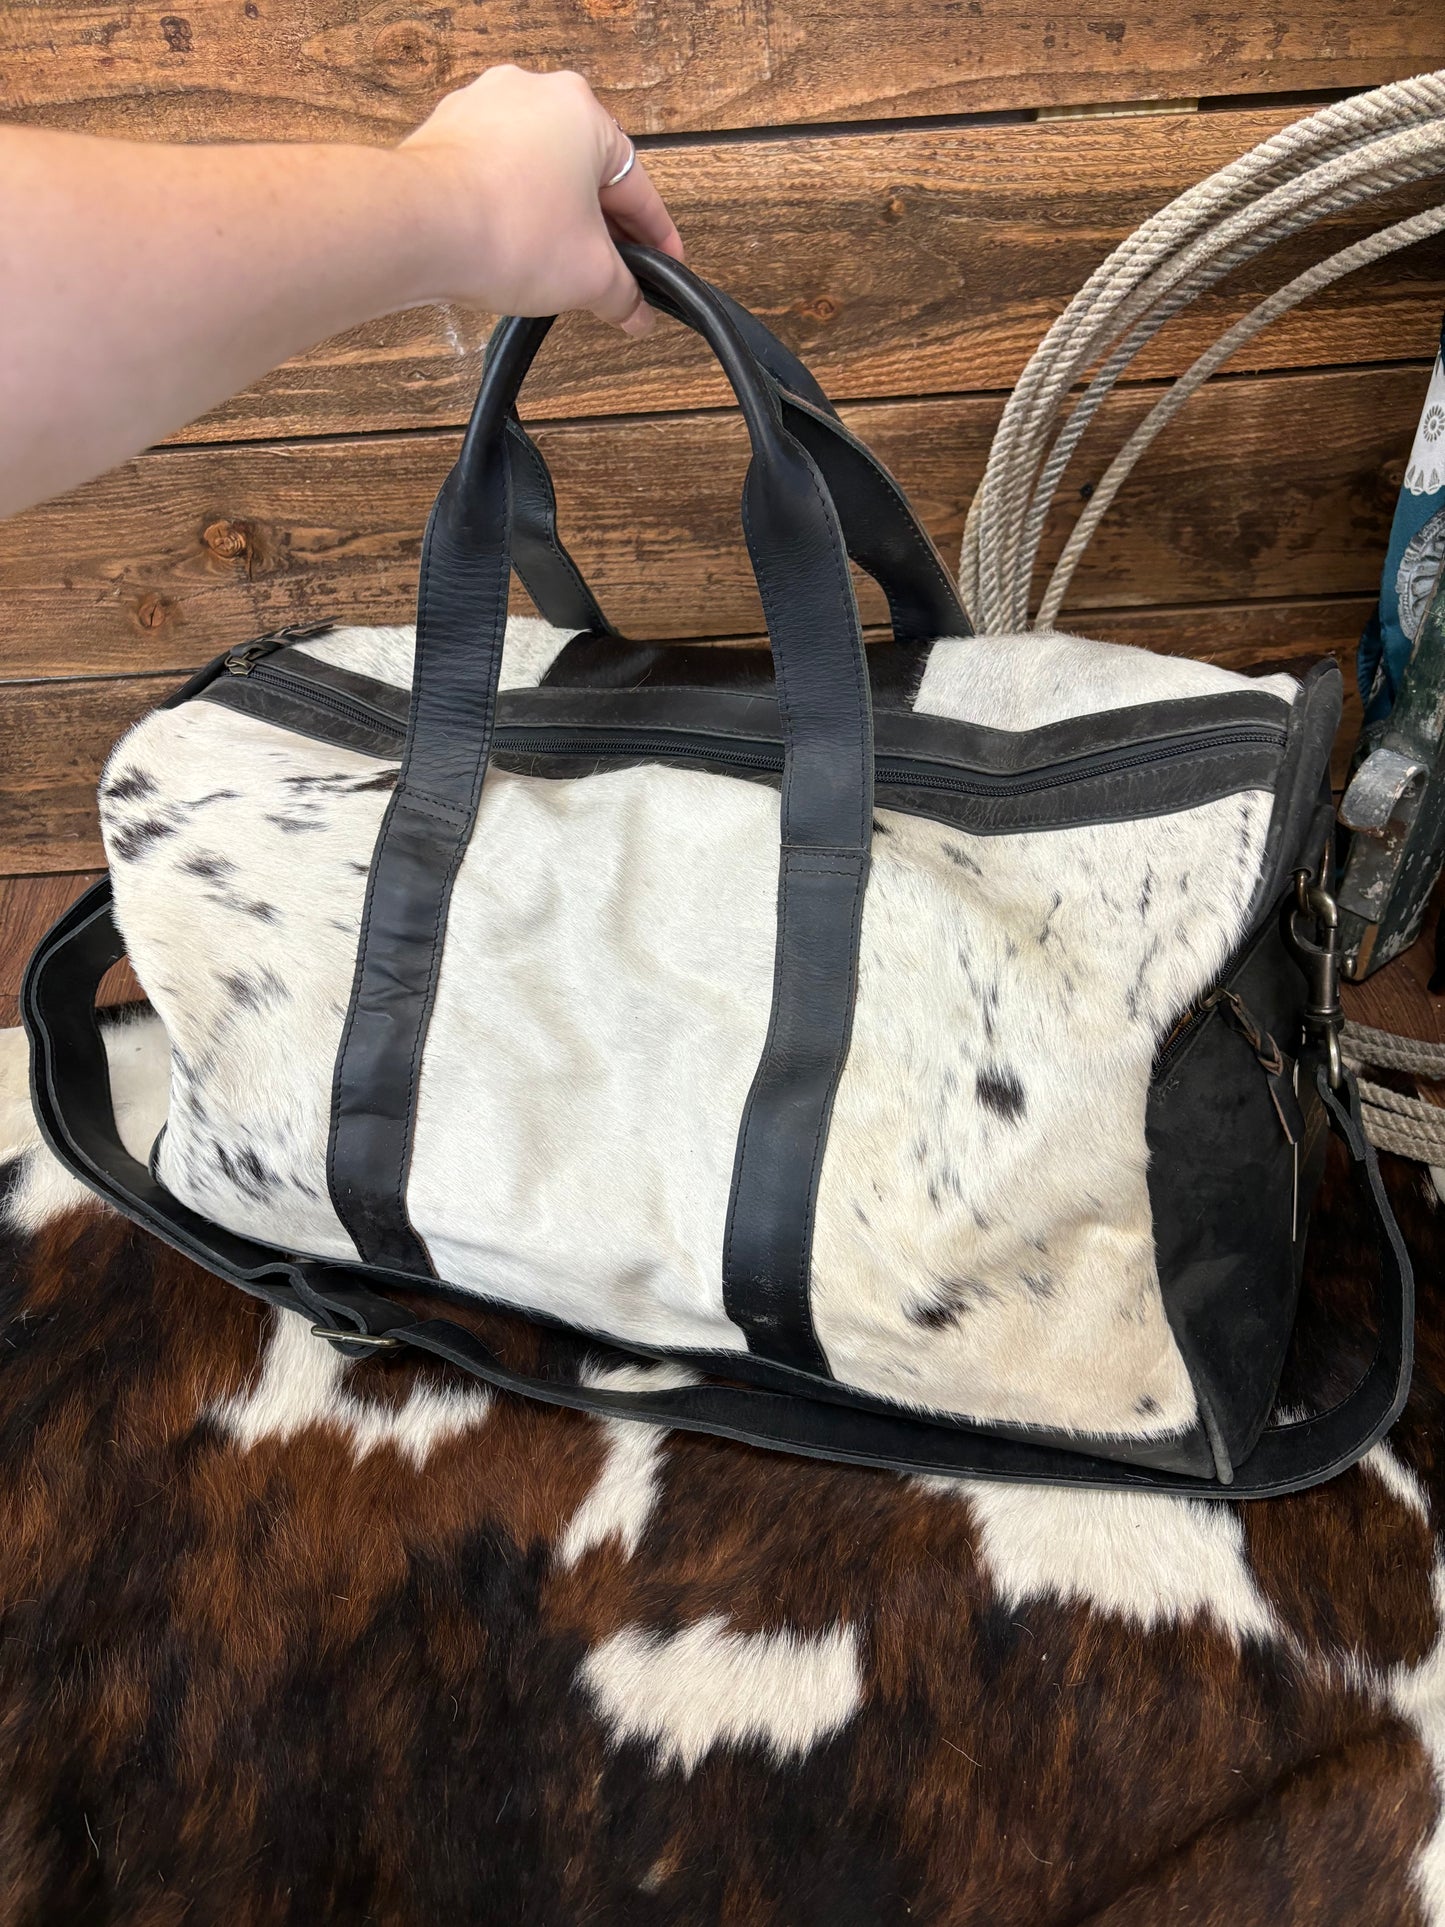 The On the Go Cowhide Duffle Bag